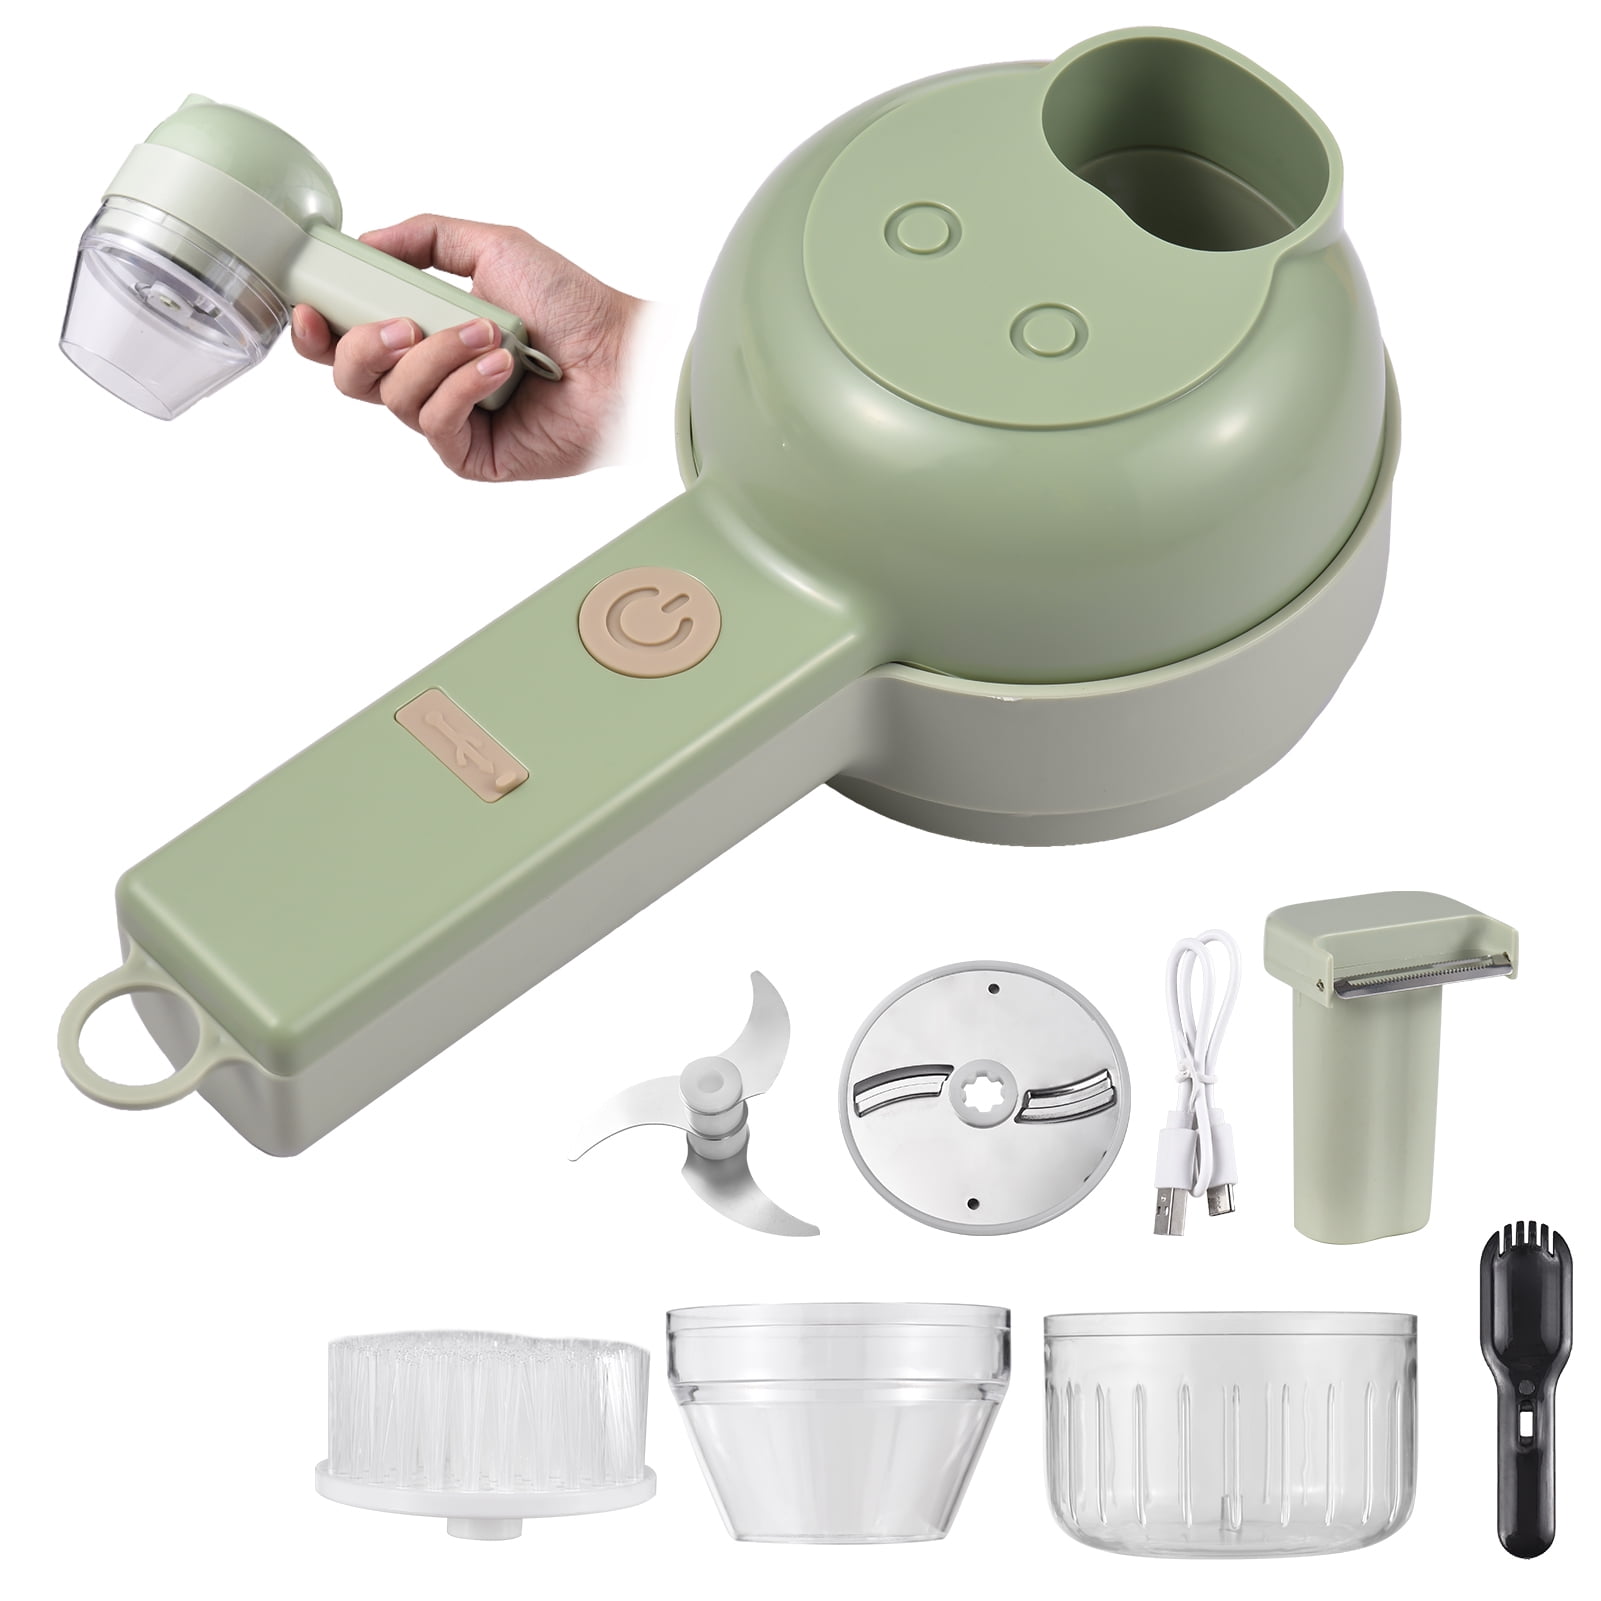 Trixy®️ 4 in 1 Electric Vegetable Chopper - Grey Technologies